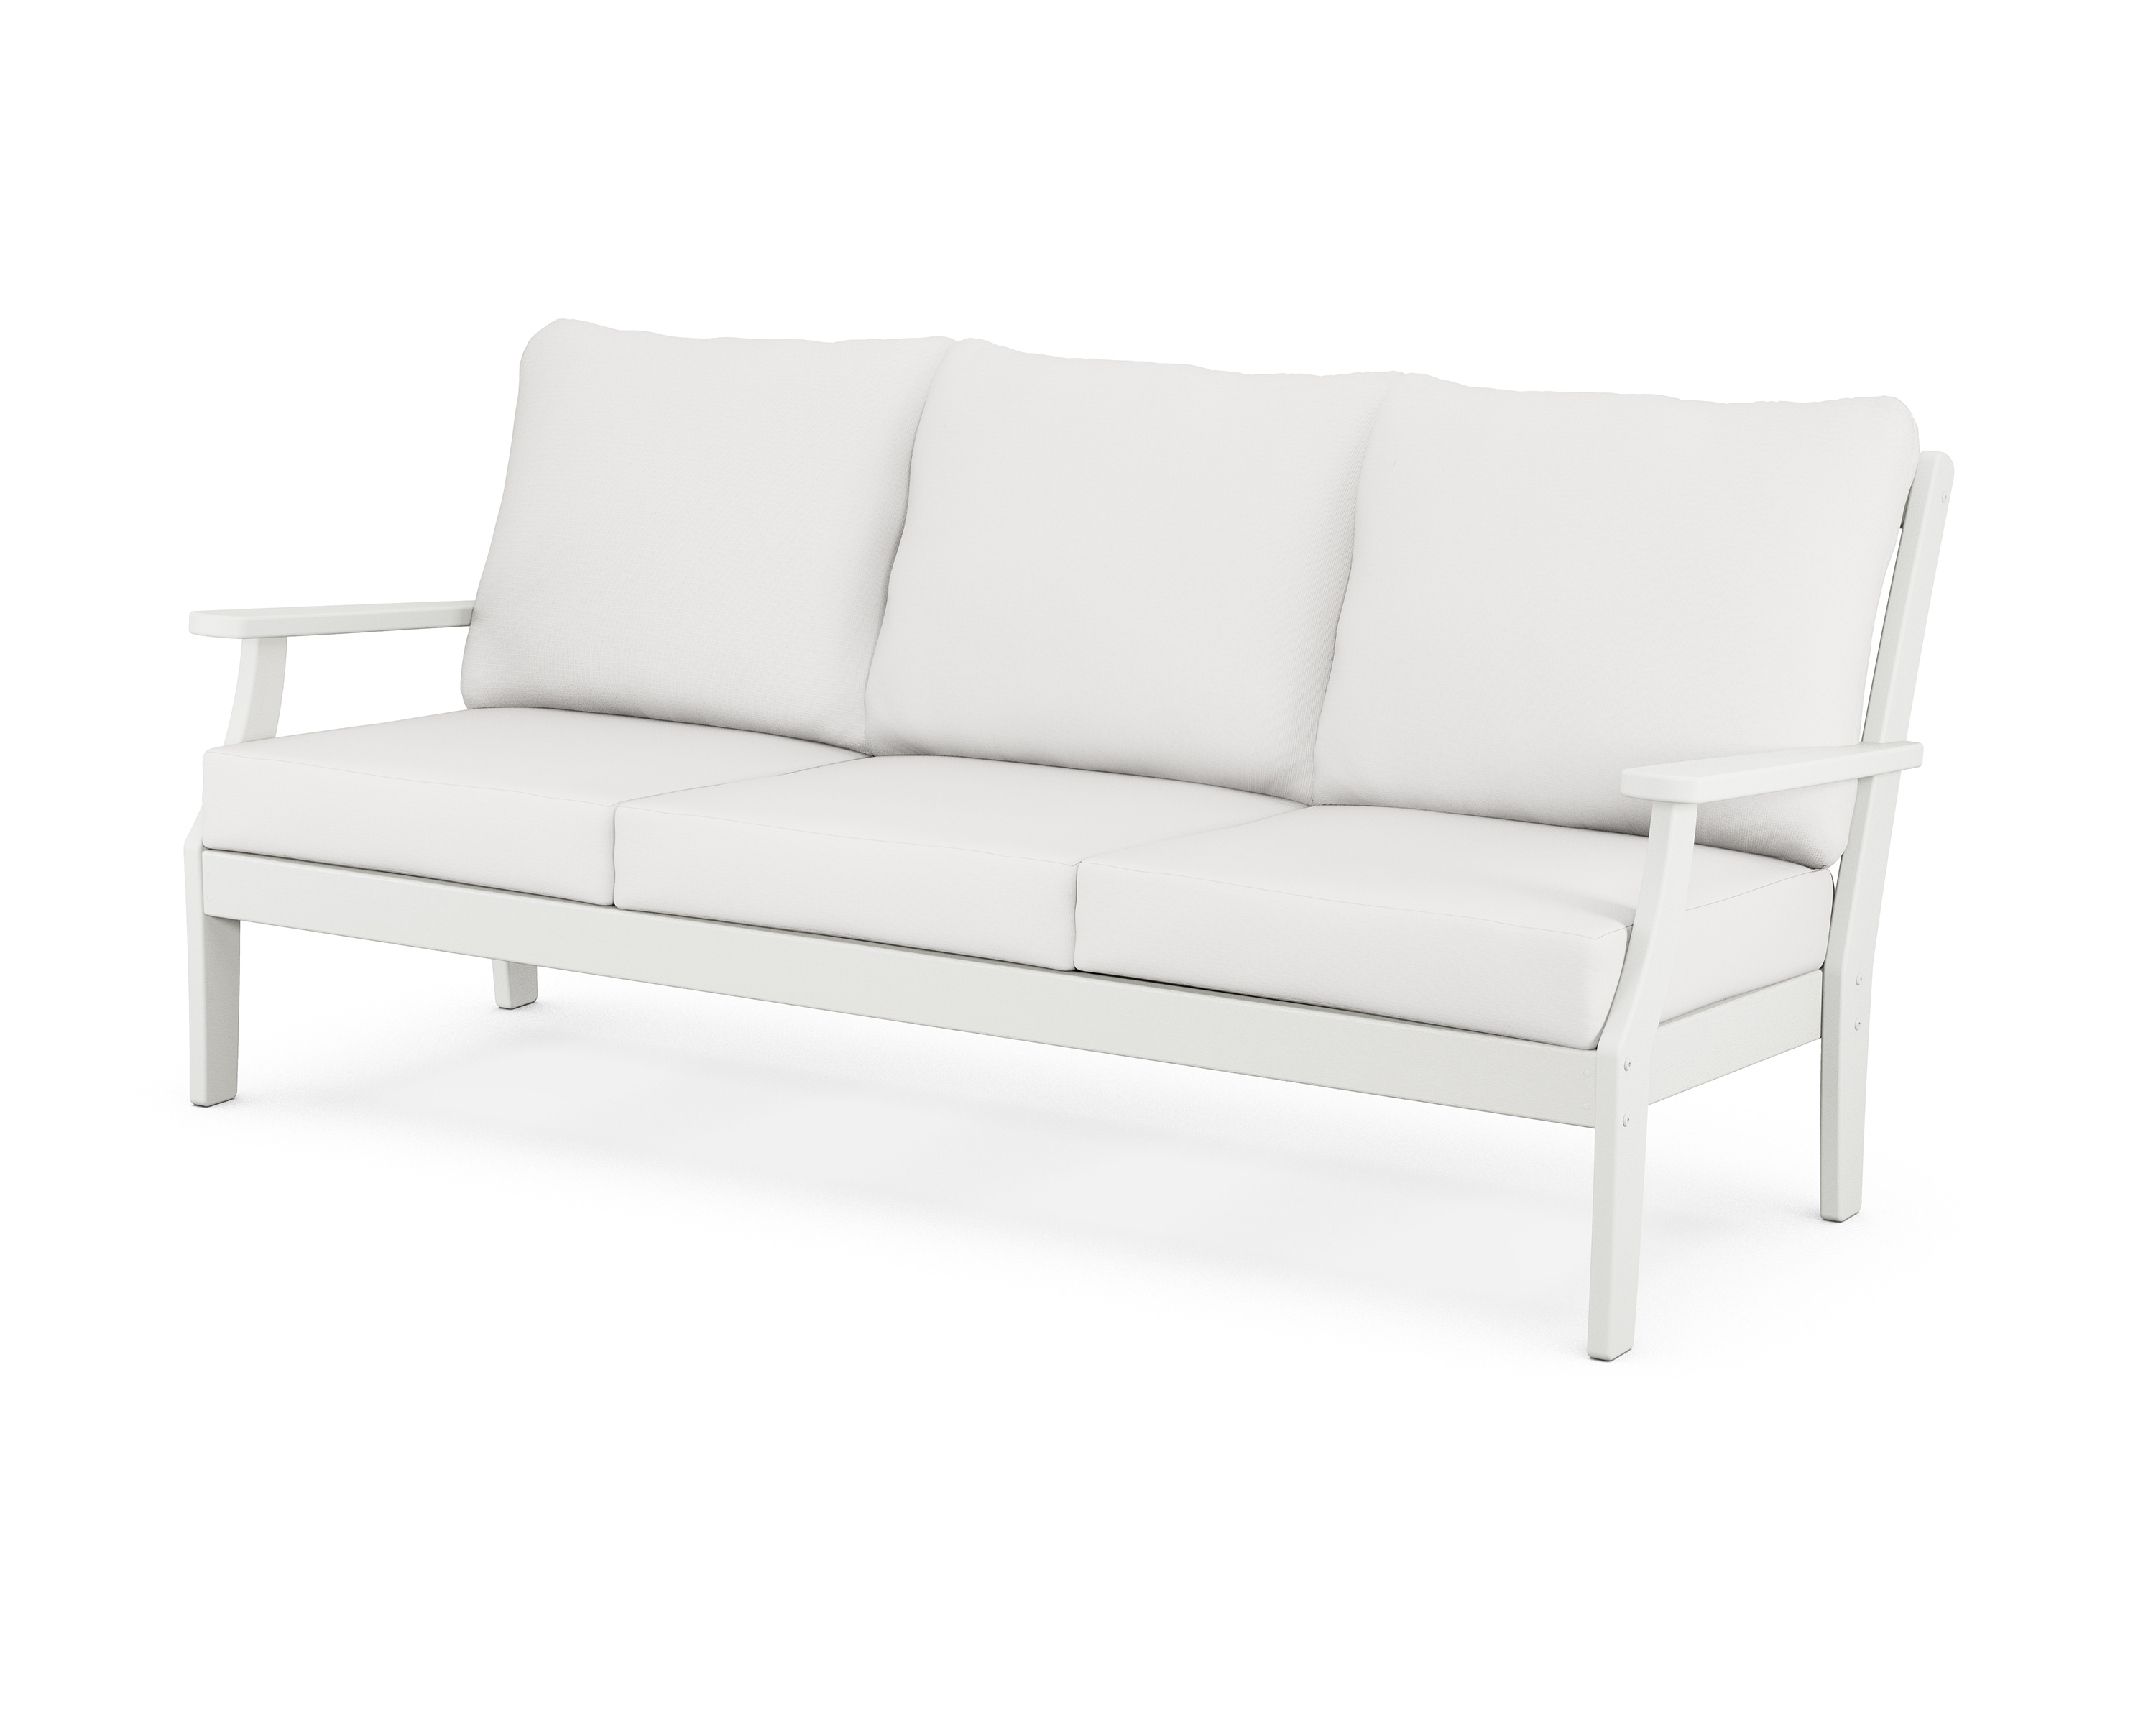 braxton deep seating sofa in vintage white / textured linen product image